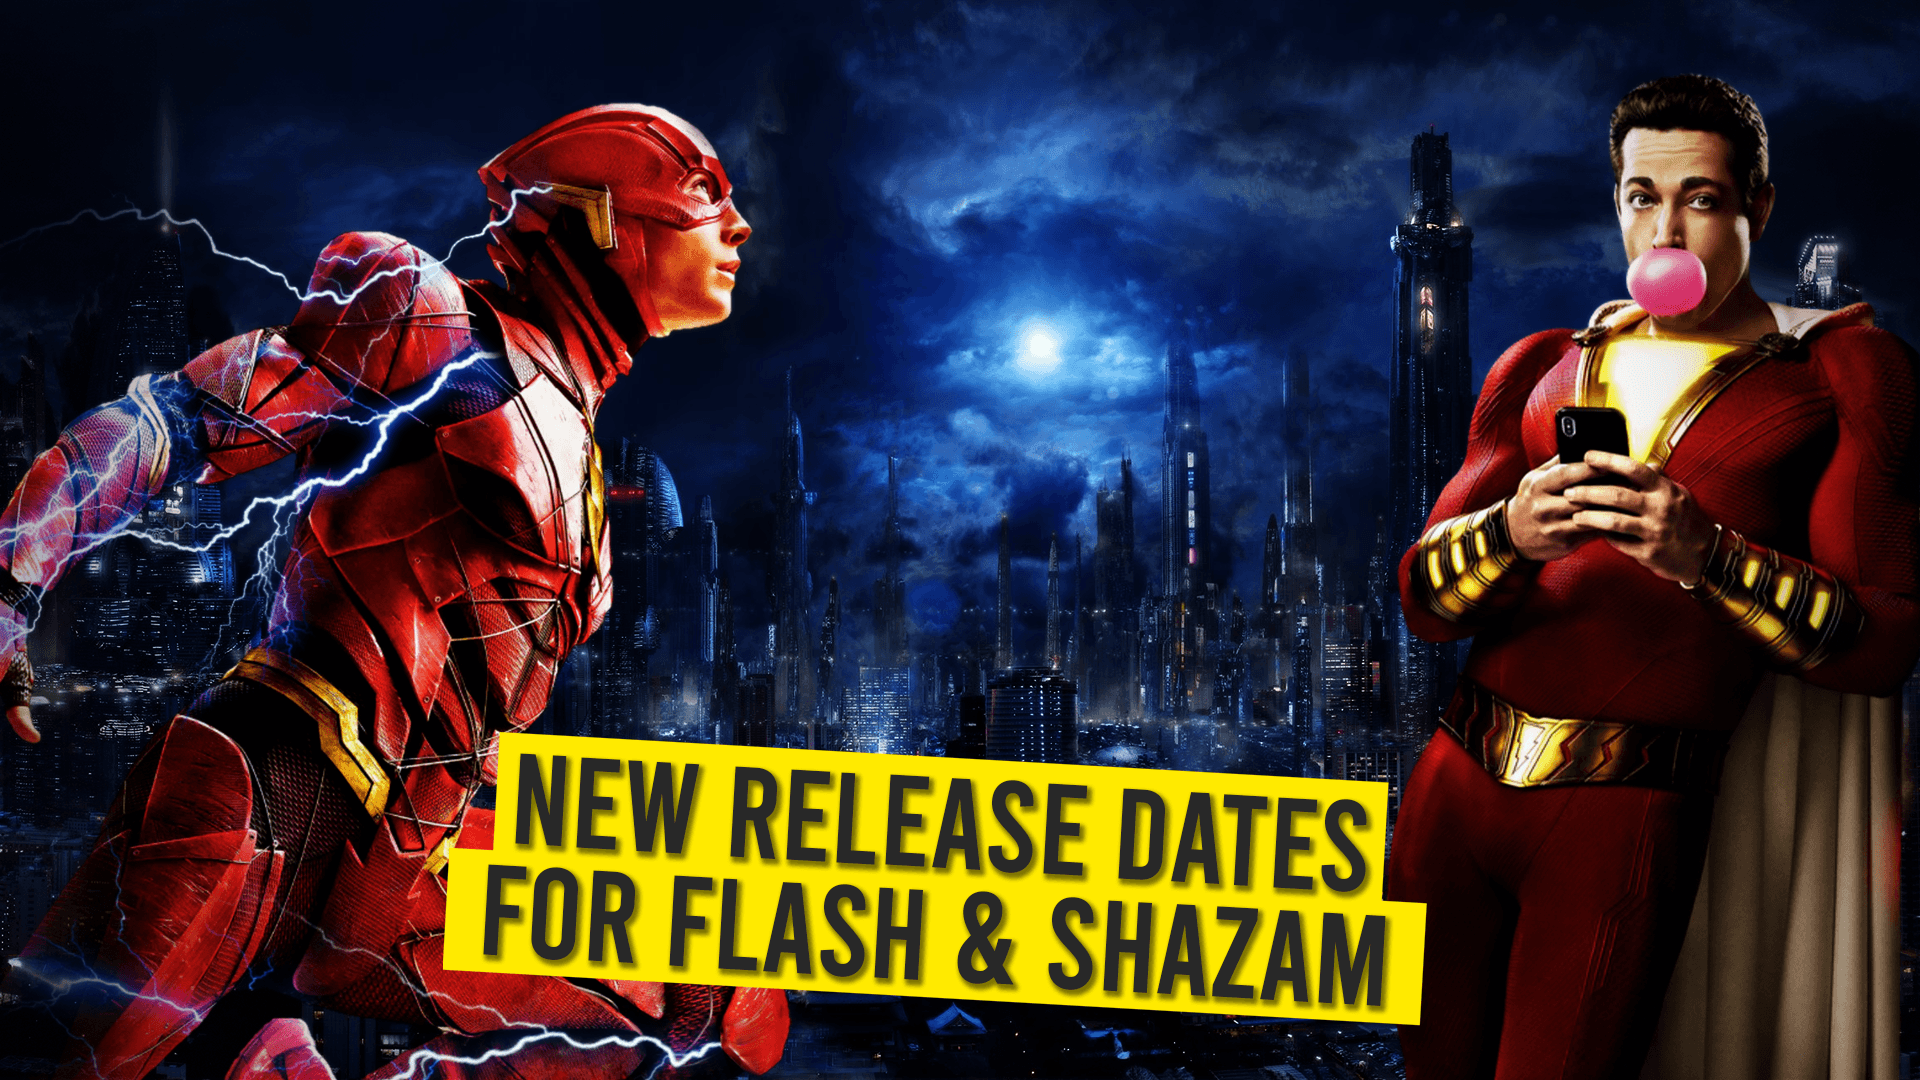 New Release Dates for DC Movies: Flash & Shazam